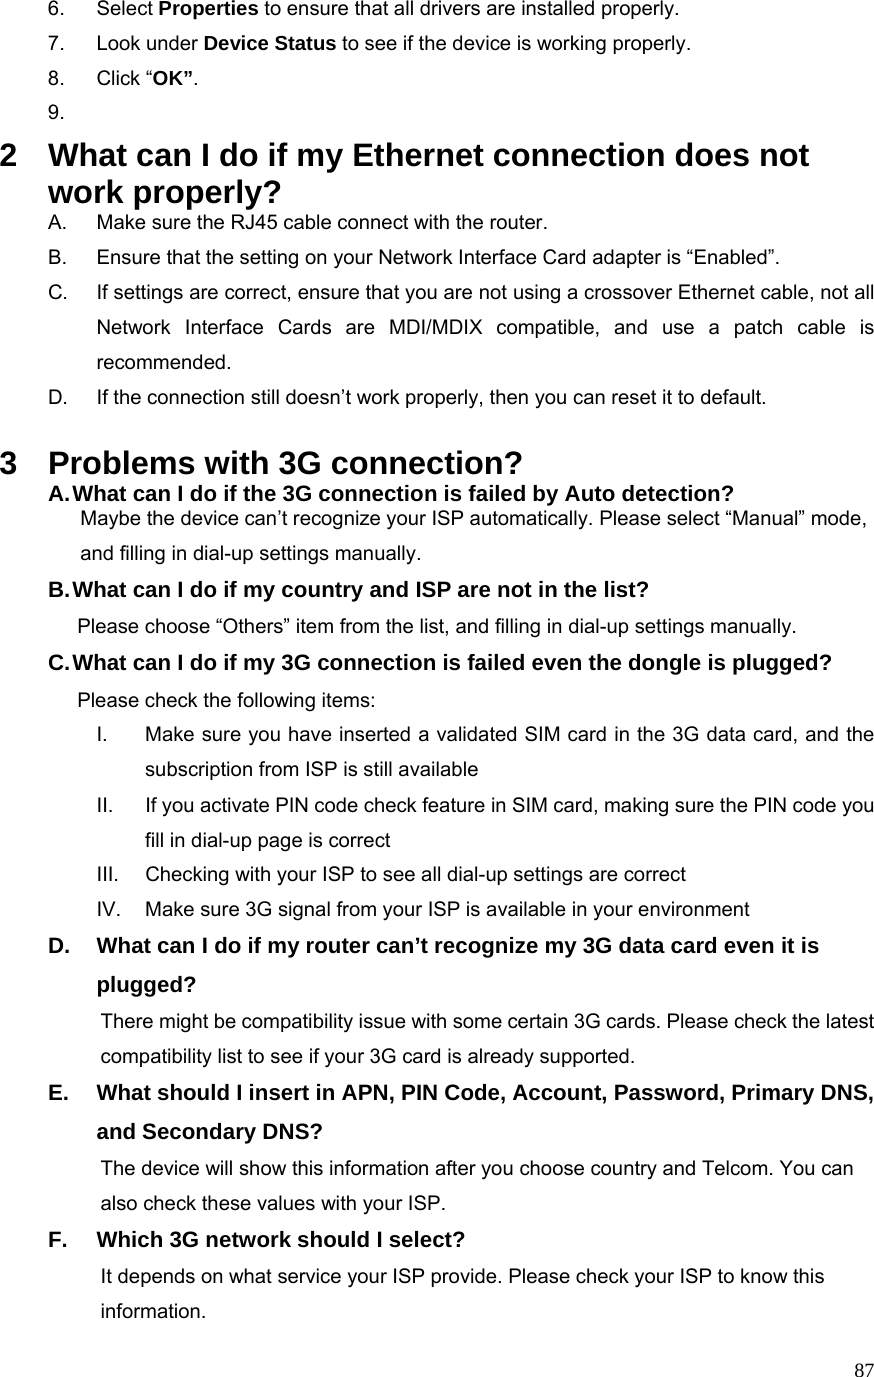  876. Select Properties to ensure that all drivers are installed properly. 7. Look under Device Status to see if the device is working properly. 8. Click “OK”. 9.  2  What can I do if my Ethernet connection does not work properly? A.  Make sure the RJ45 cable connect with the router. B.  Ensure that the setting on your Network Interface Card adapter is “Enabled”. C.  If settings are correct, ensure that you are not using a crossover Ethernet cable, not all Network Interface Cards are MDI/MDIX compatible, and use a patch cable is recommended. D.  If the connection still doesn’t work properly, then you can reset it to default.      3  Problems with 3G connection? A. What can I do if the 3G connection is failed by Auto detection?           Maybe the device can’t recognize your ISP automatically. Please select “Manual” mode,     and filling in dial-up settings manually. B. What can I do if my country and ISP are not in the list?        Please choose “Others” item from the list, and filling in dial-up settings manually. C. What can I do if my 3G connection is failed even the dongle is plugged?        Please check the following items: I.  Make sure you have inserted a validated SIM card in the 3G data card, and the subscription from ISP is still available II.  If you activate PIN code check feature in SIM card, making sure the PIN code you fill in dial-up page is correct III.  Checking with your ISP to see all dial-up settings are correct IV.  Make sure 3G signal from your ISP is available in your environment D.  What can I do if my router can’t recognize my 3G data card even it is plugged?           There might be compatibility issue with some certain 3G cards. Please check the latest     compatibility list to see if your 3G card is already supported. E.  What should I insert in APN, PIN Code, Account, Password, Primary DNS, and Secondary DNS?                     The device will show this information after you choose country and Telcom. You can       also check these values with your ISP. F.  Which 3G network should I select?           It depends on what service your ISP provide. Please check your ISP to know this information. 